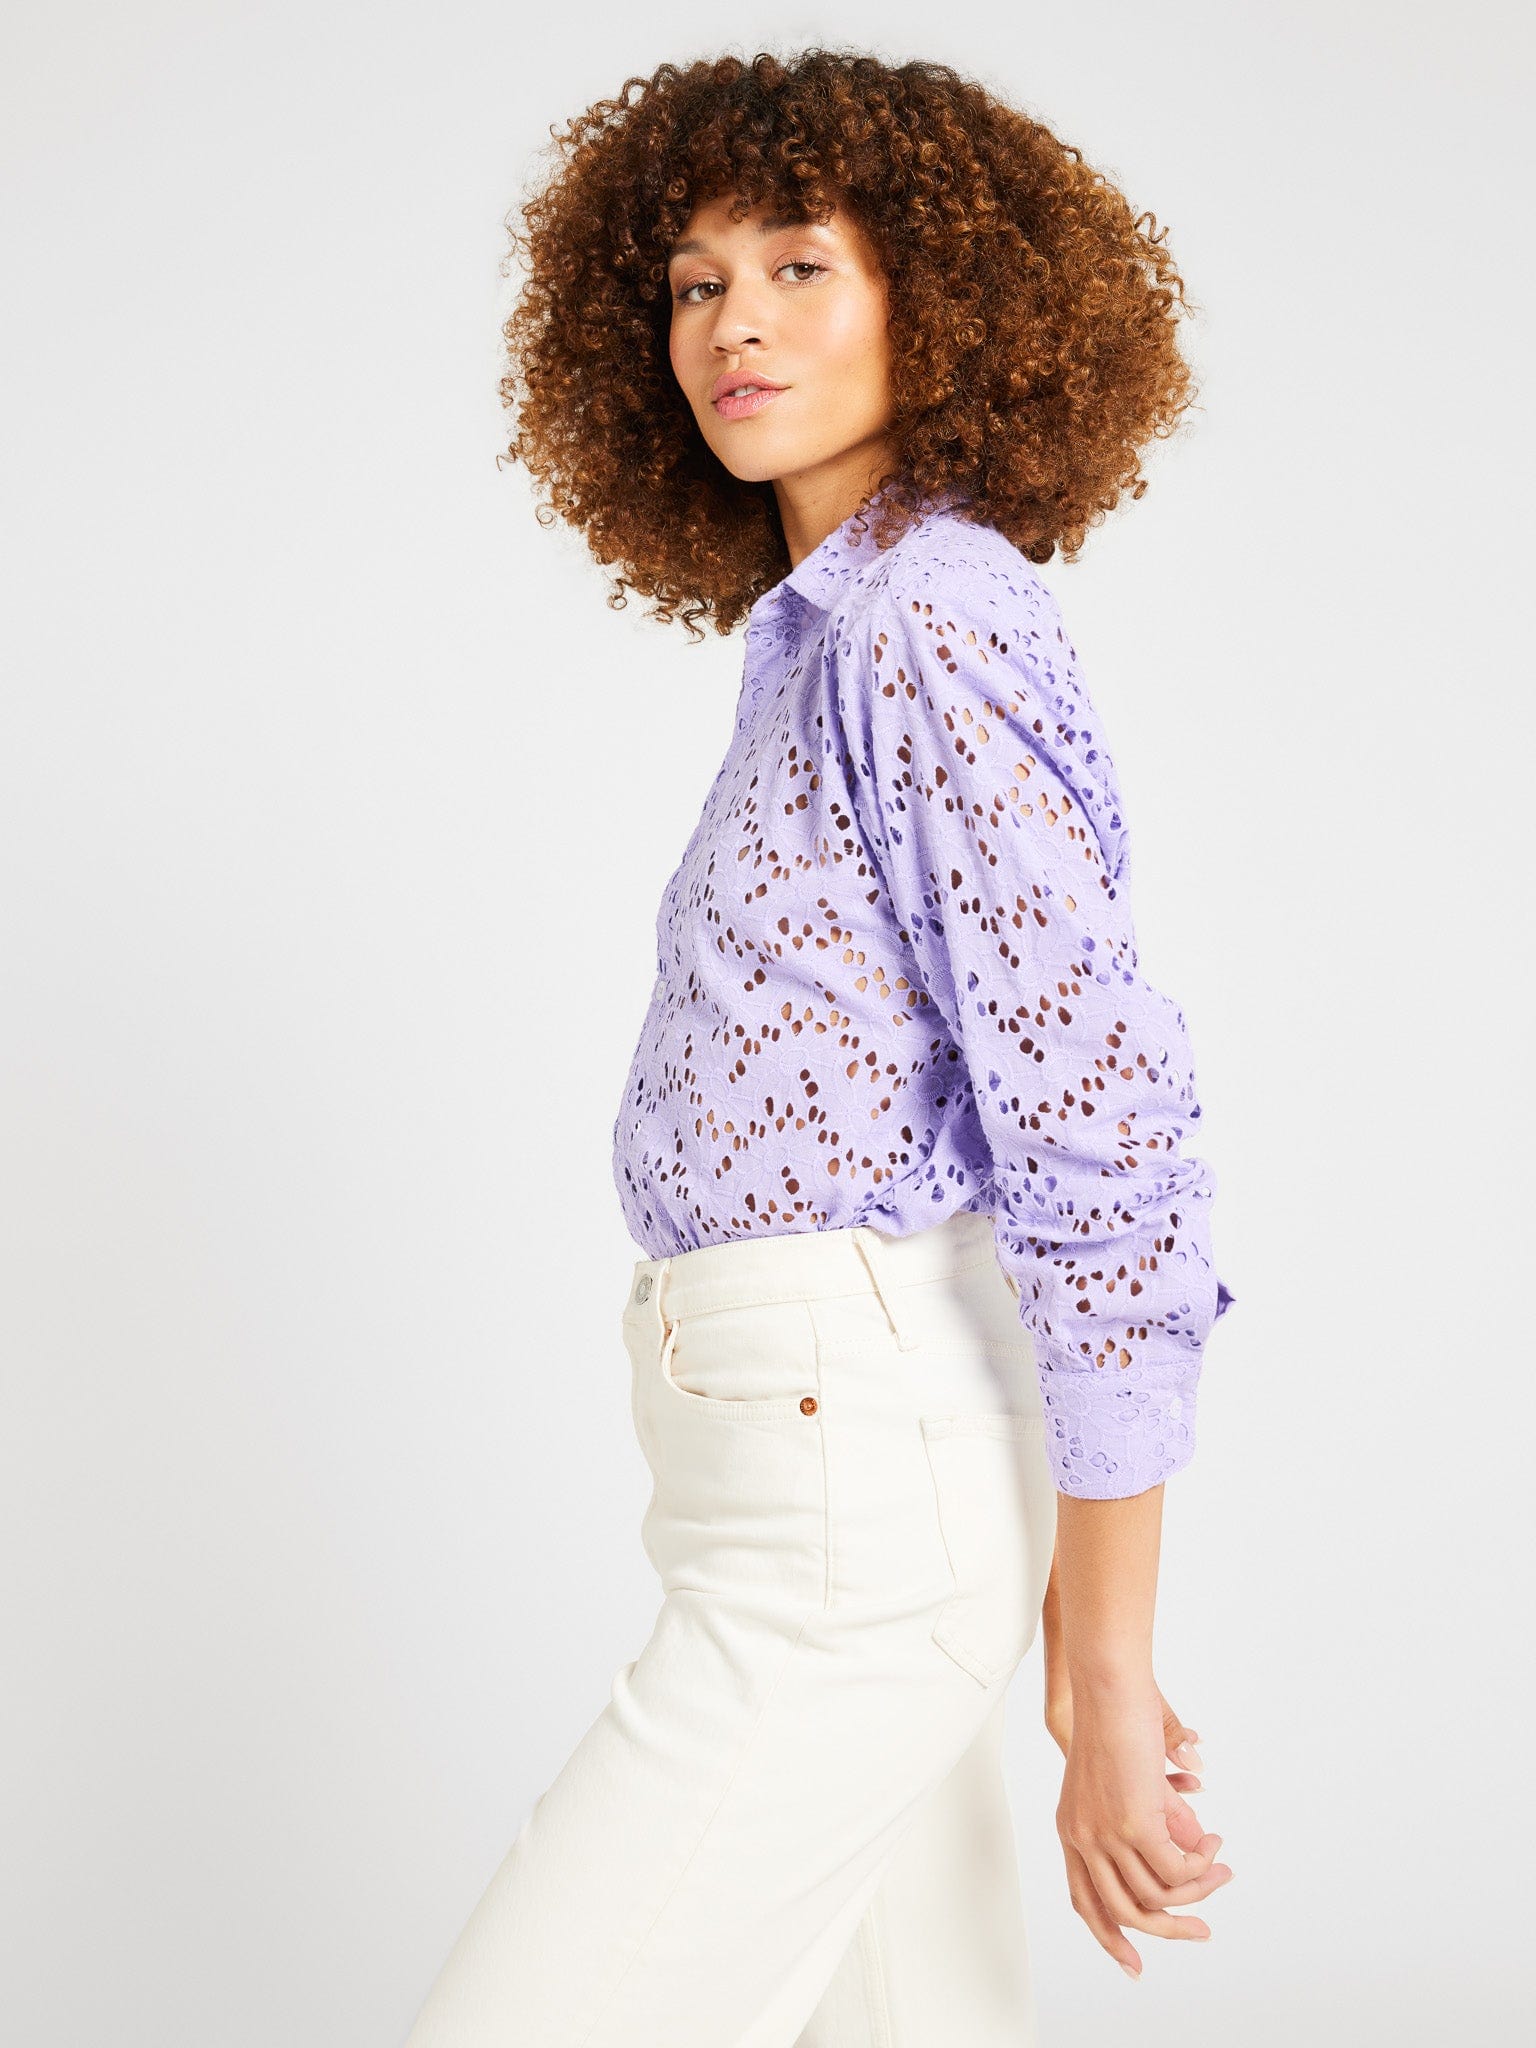 MILLE Clothing Sofia Top in Taffy Eyelet